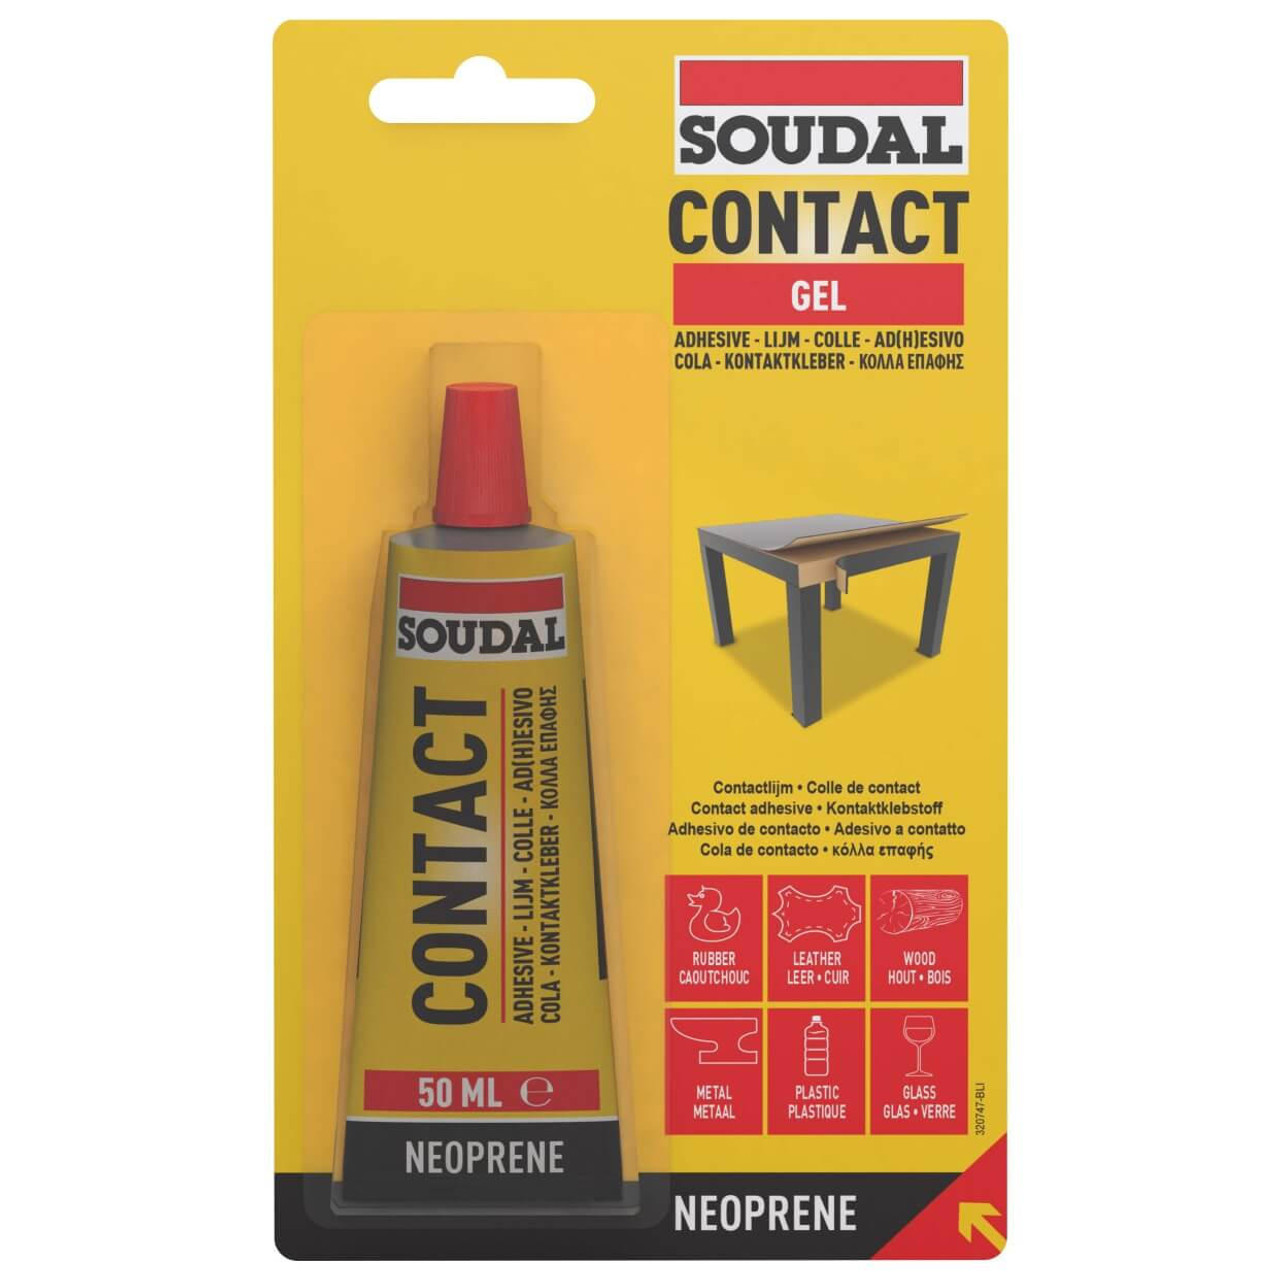 Soudal Contact Adhesive Gel Blister 50ml